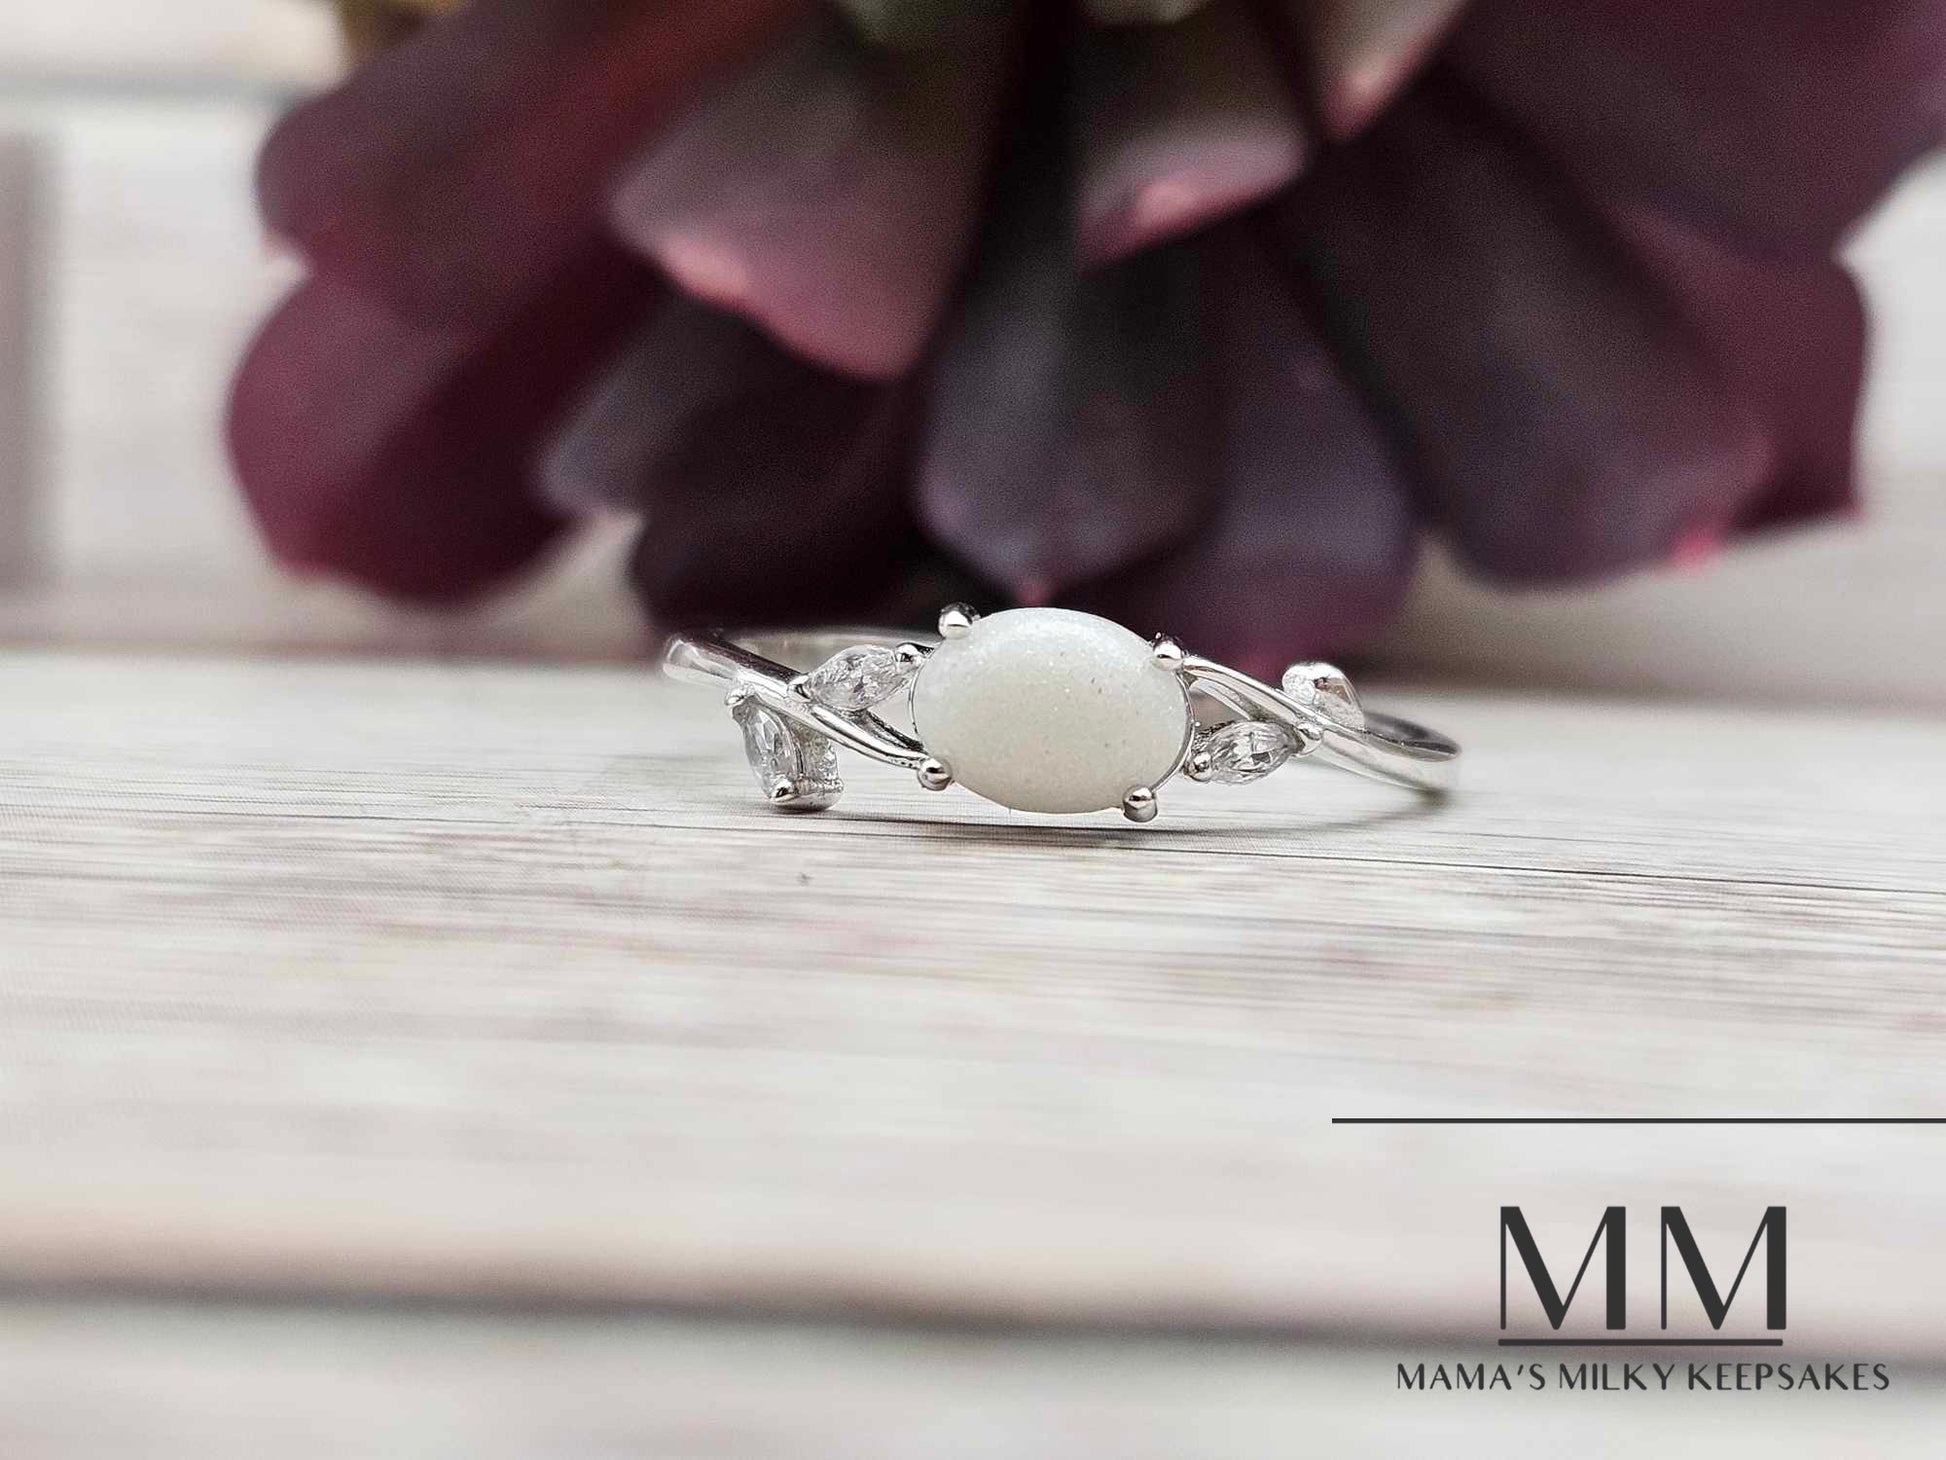 Breastmilk Oval Ring, Cremation Oval Ring, Keepsake Oval Ring, Sterling Silver Oval Ring, Hair Oval Ring, Ash Oval Ring, Umbilical Cord Oval Ring, BreastmilkJewelry Oval Ring